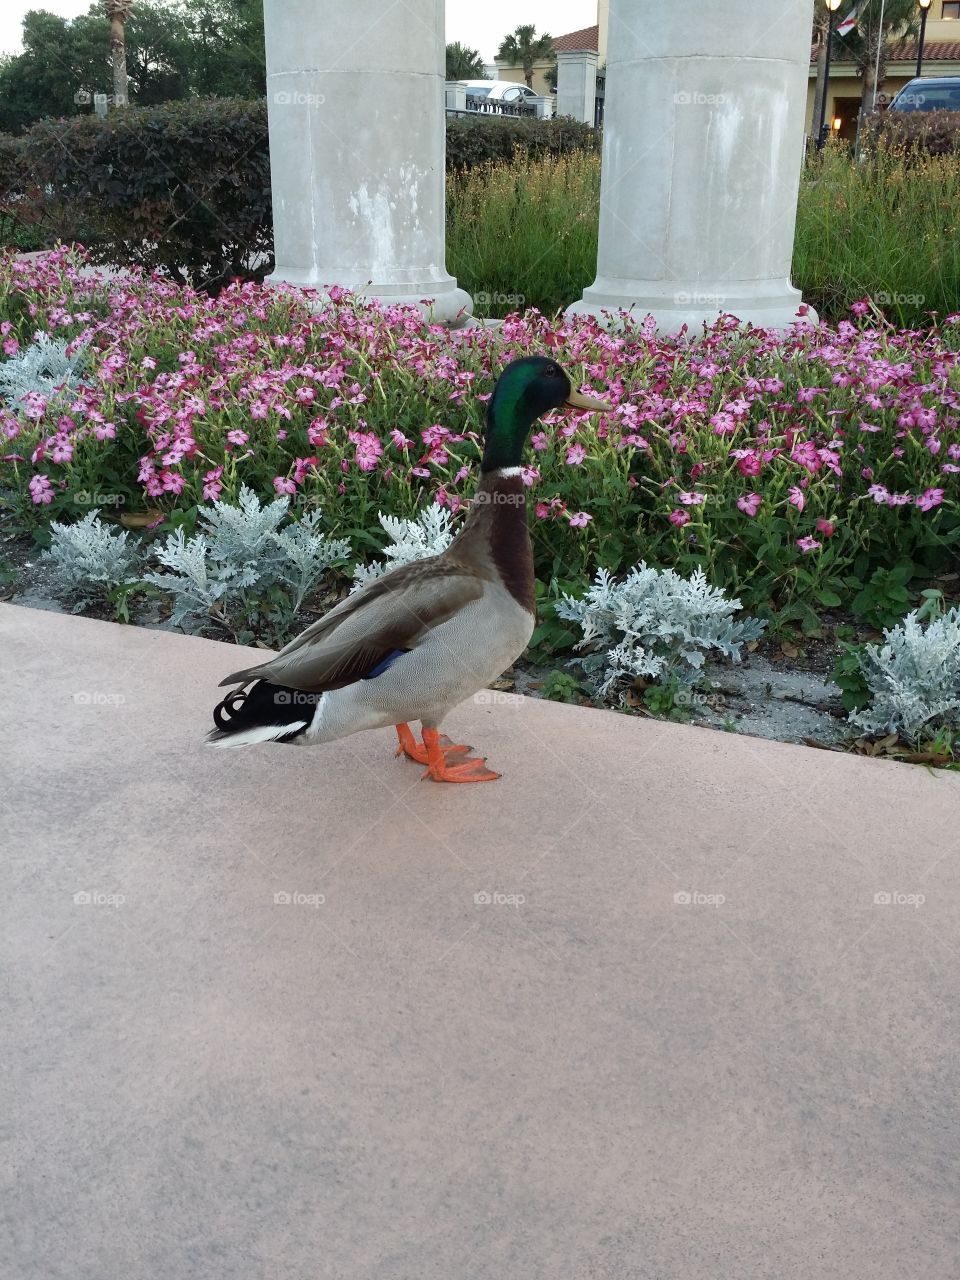 HEY Ducky. took this at Cranes Roost in Altamonte Springs Florida. 